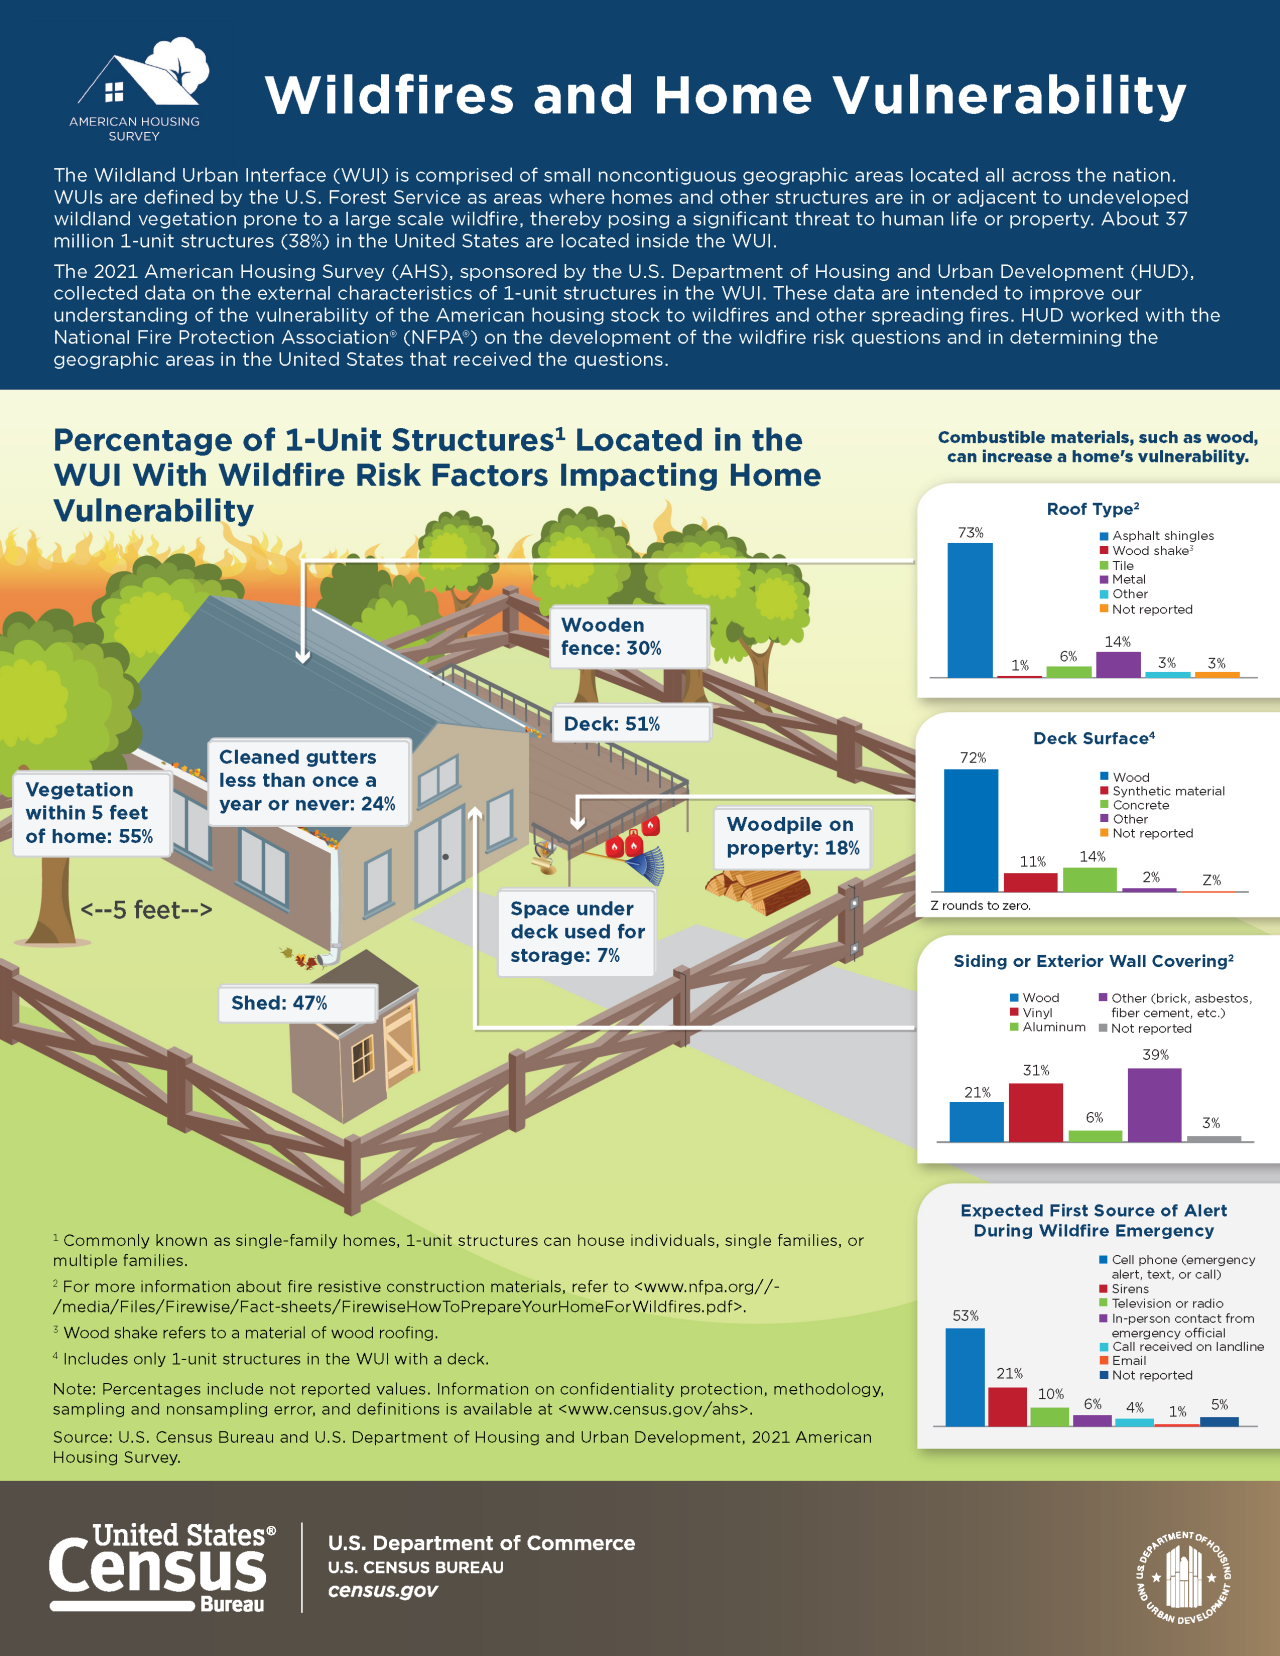 2021 AHS Infographic: Wildfires and Home Vulnerability